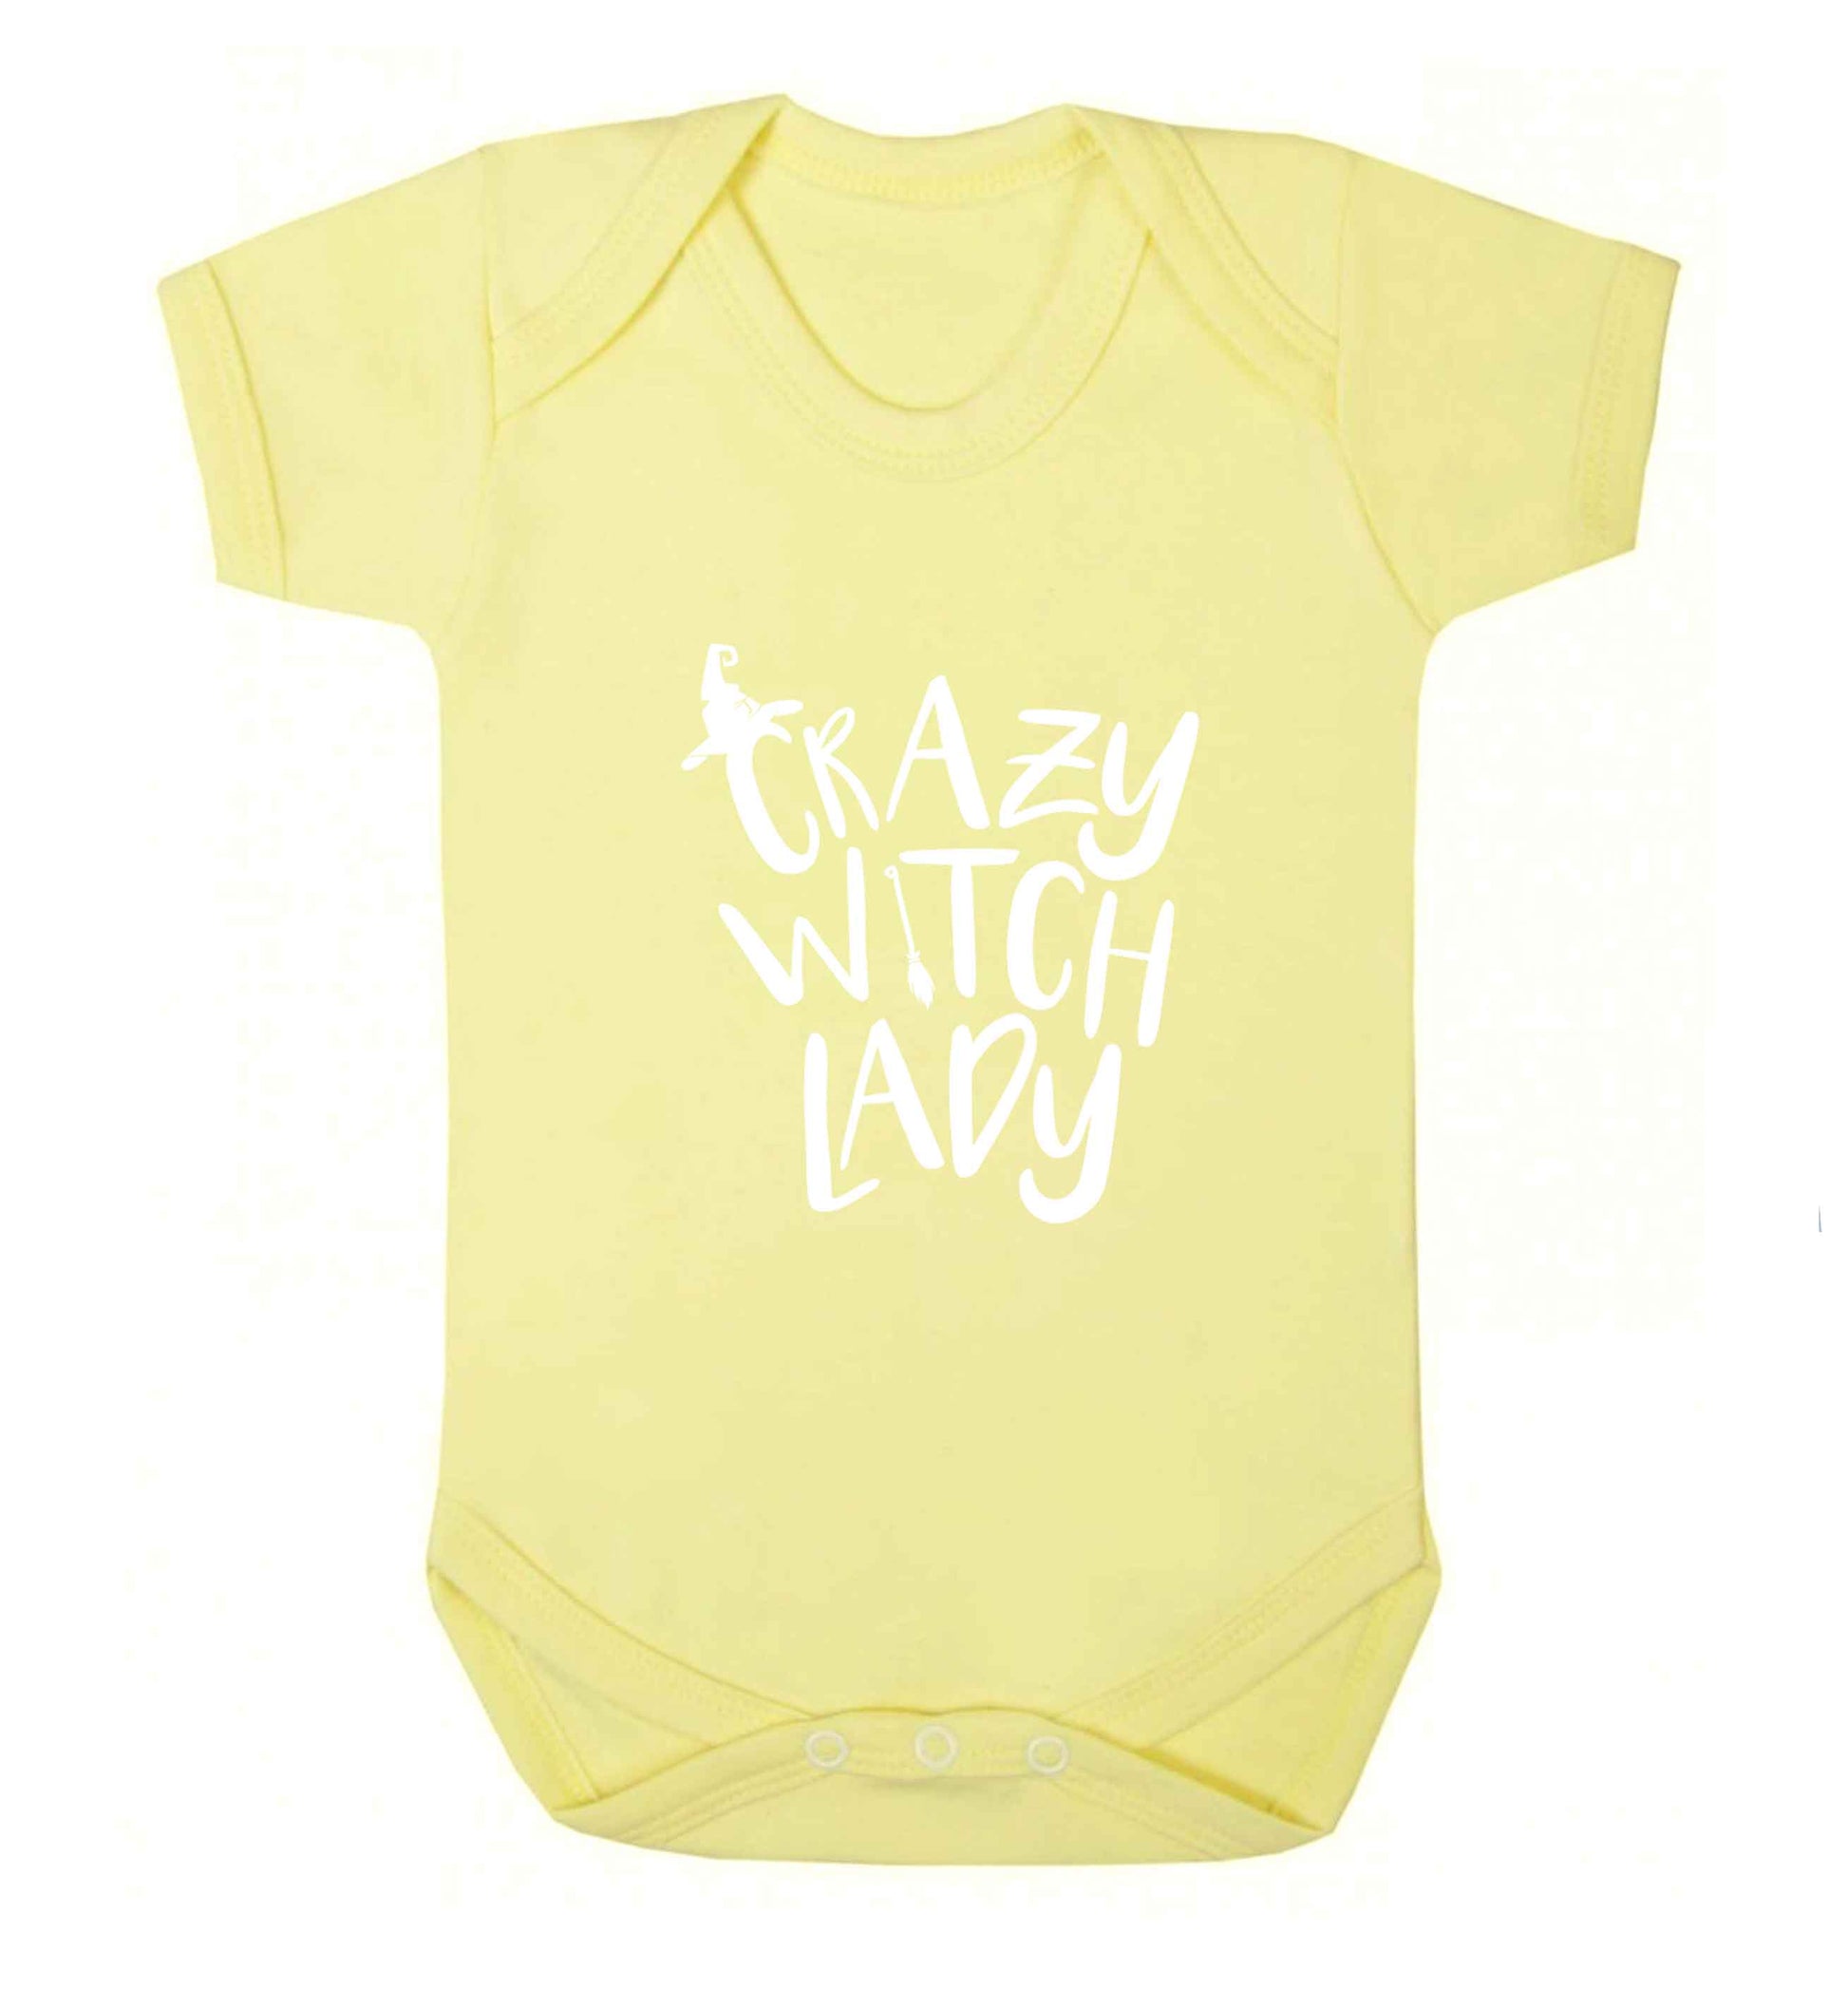 Crazy witch lady baby vest pale yellow 18-24 months